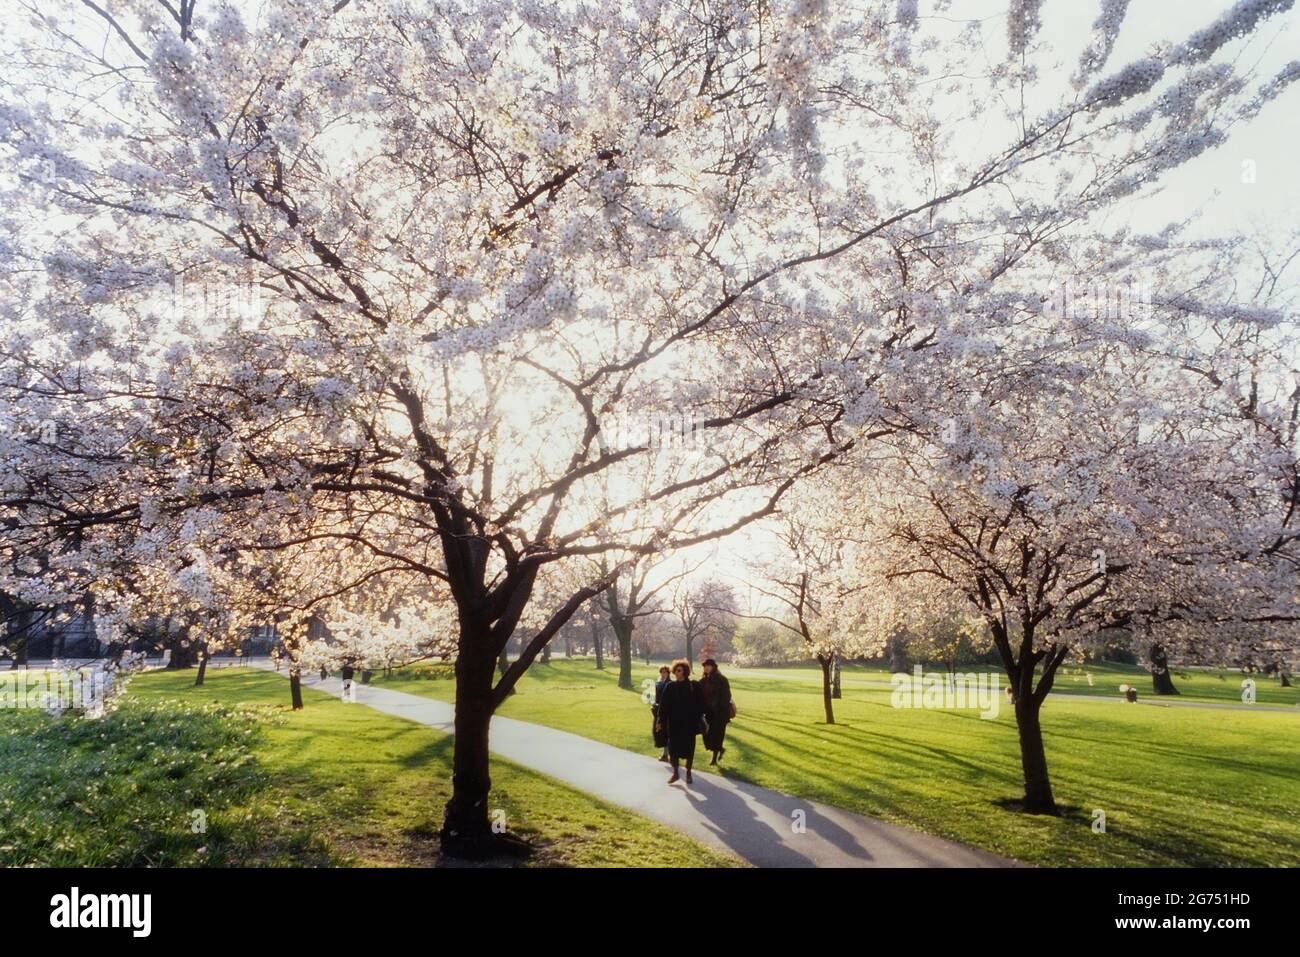 Ornamental cherry trees with Cherry blossom in St James’s Park, London, England, UK Stock Photo